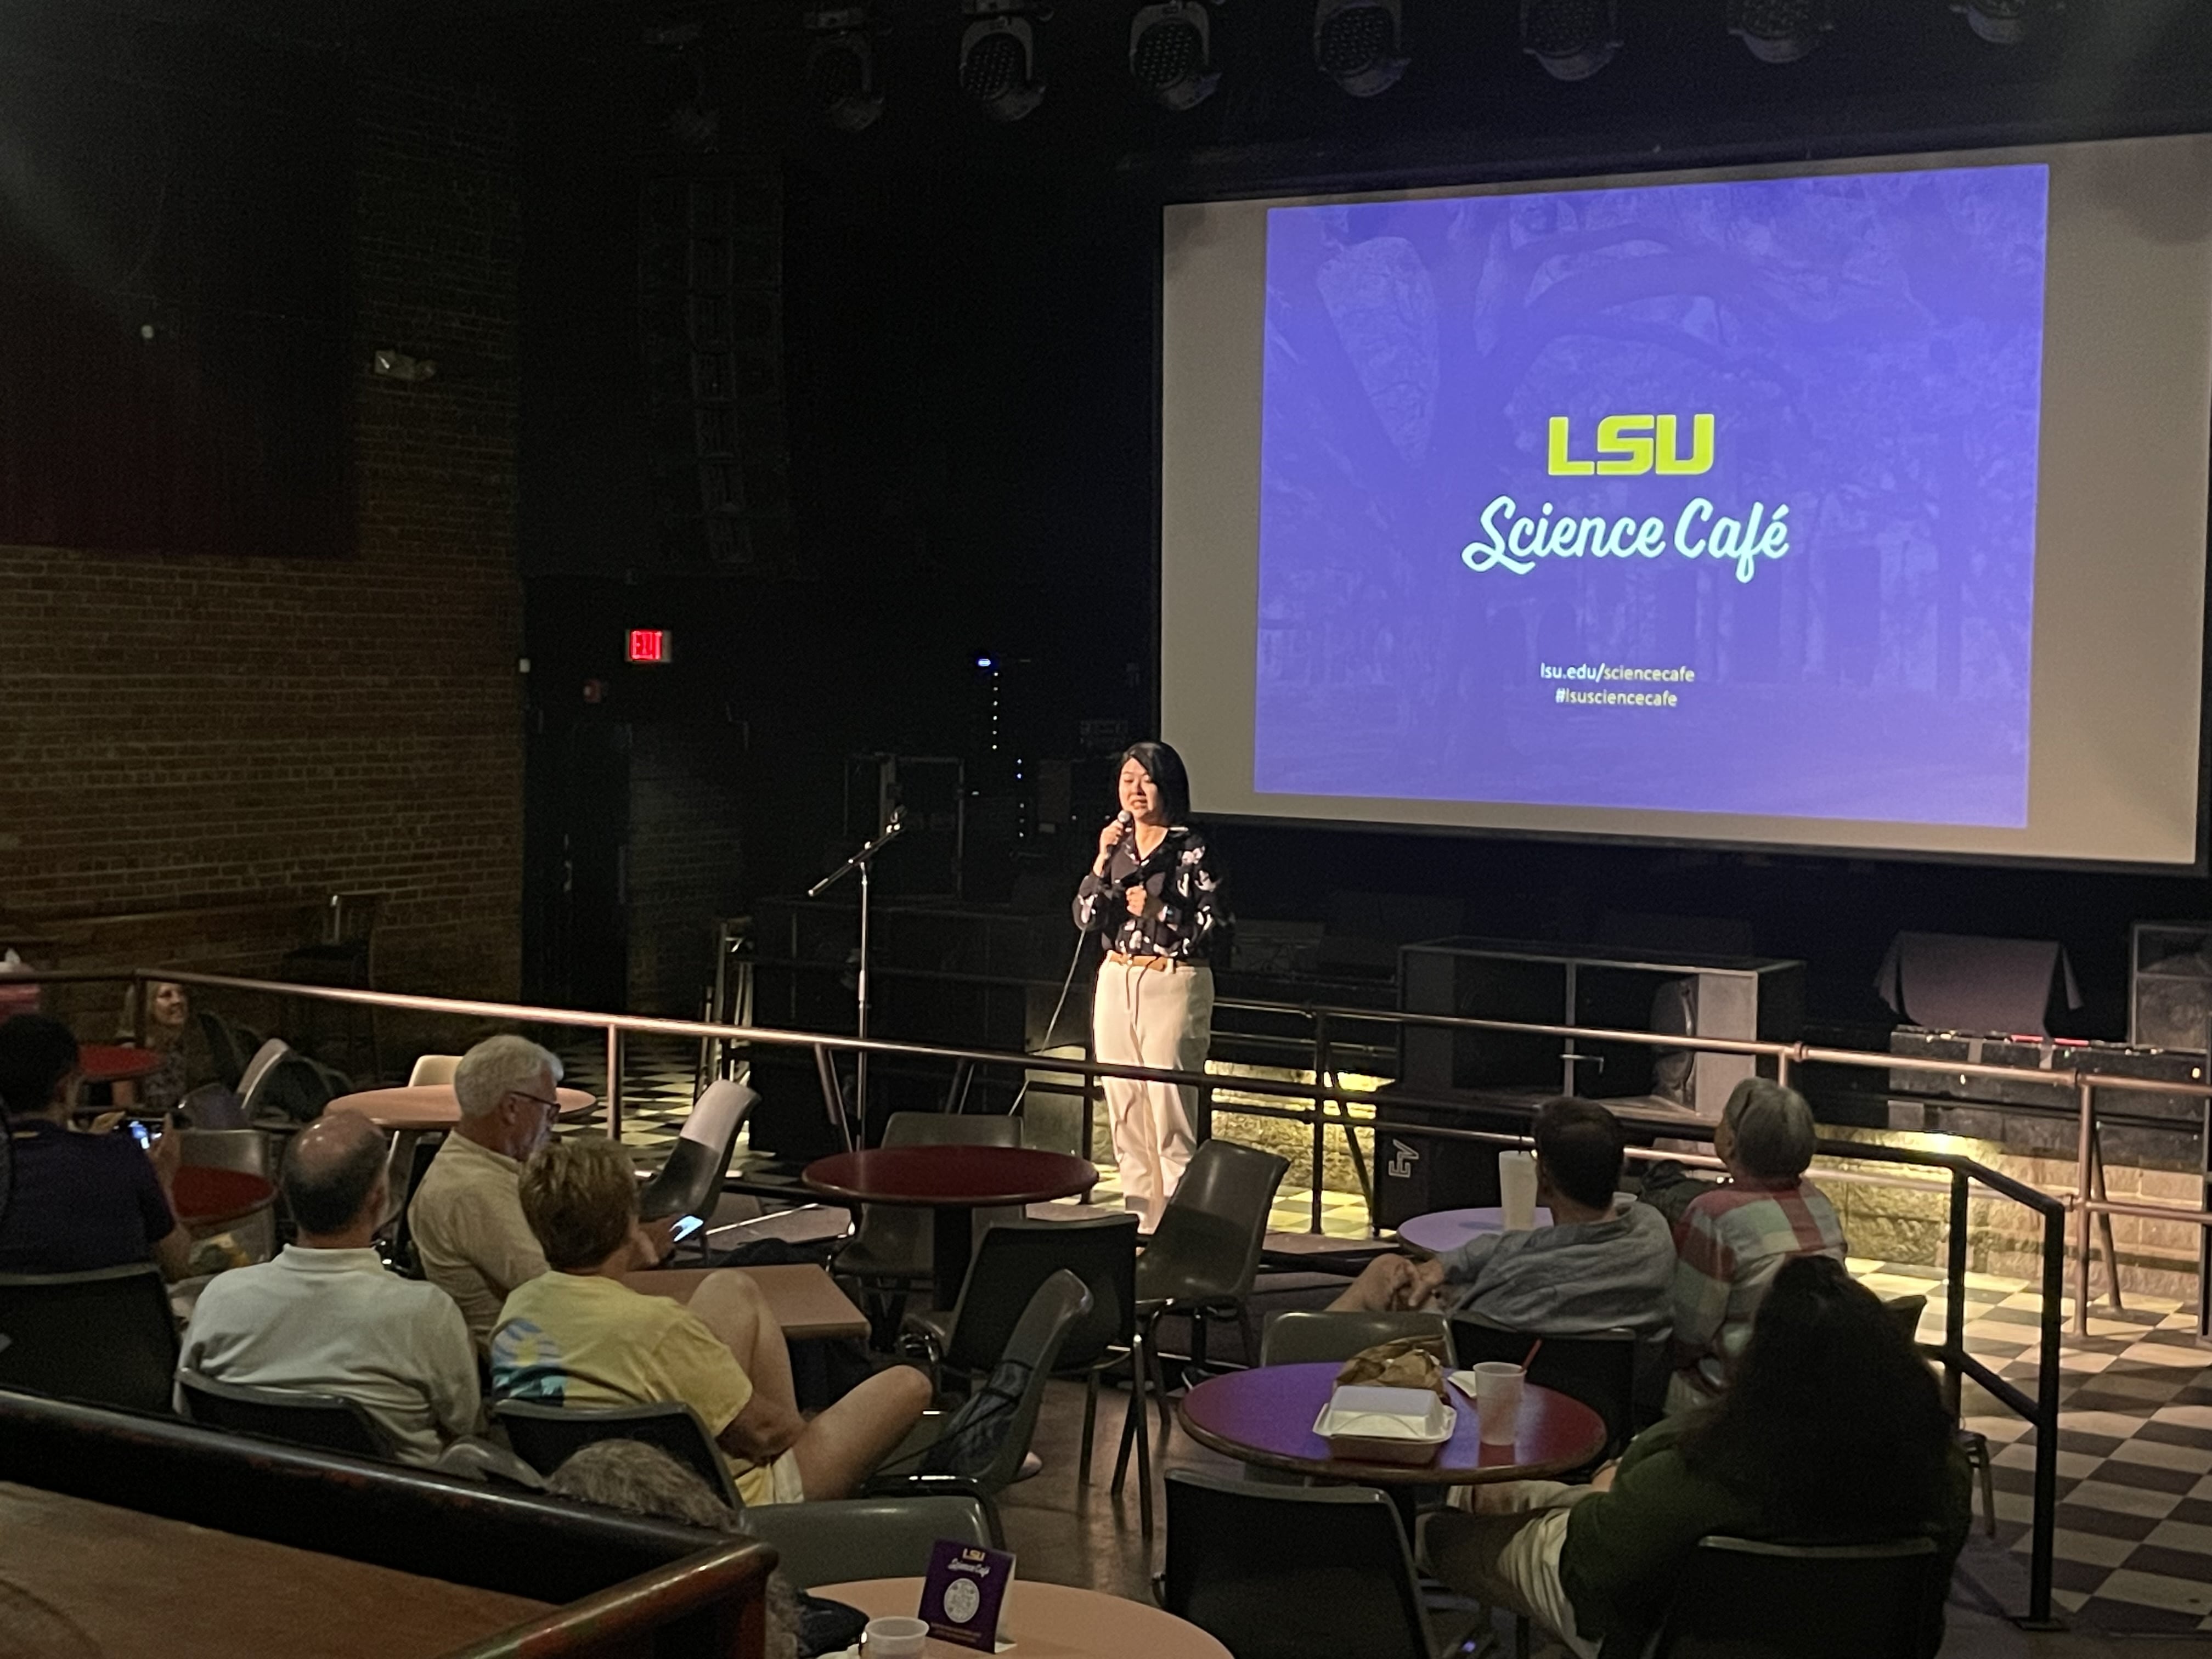 Chen presenting at LSU Science Cafe